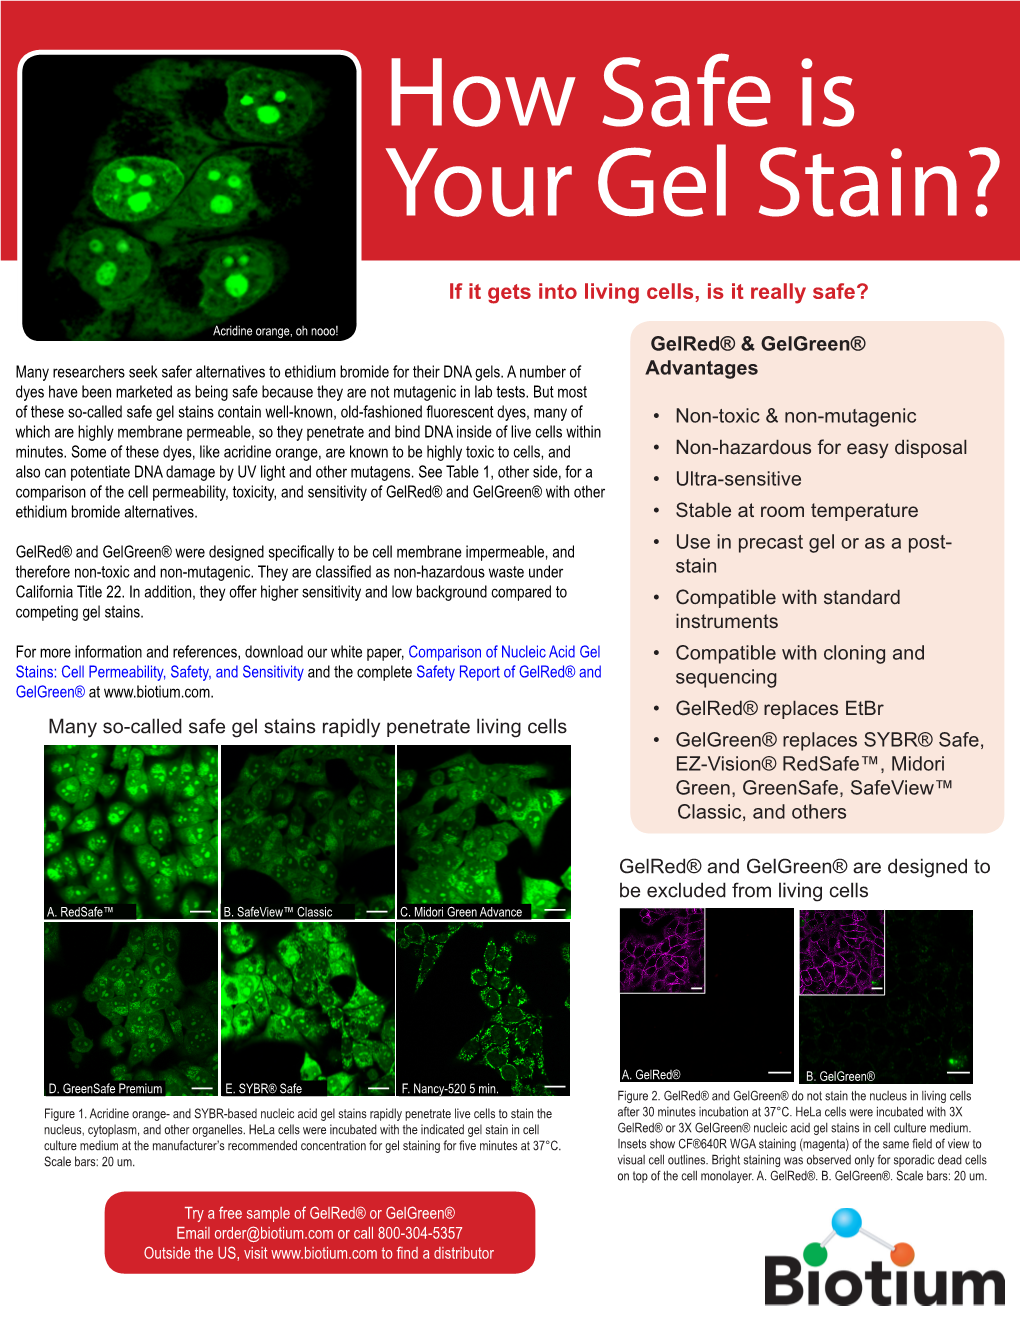 How Safe Is Your Gel Stain?